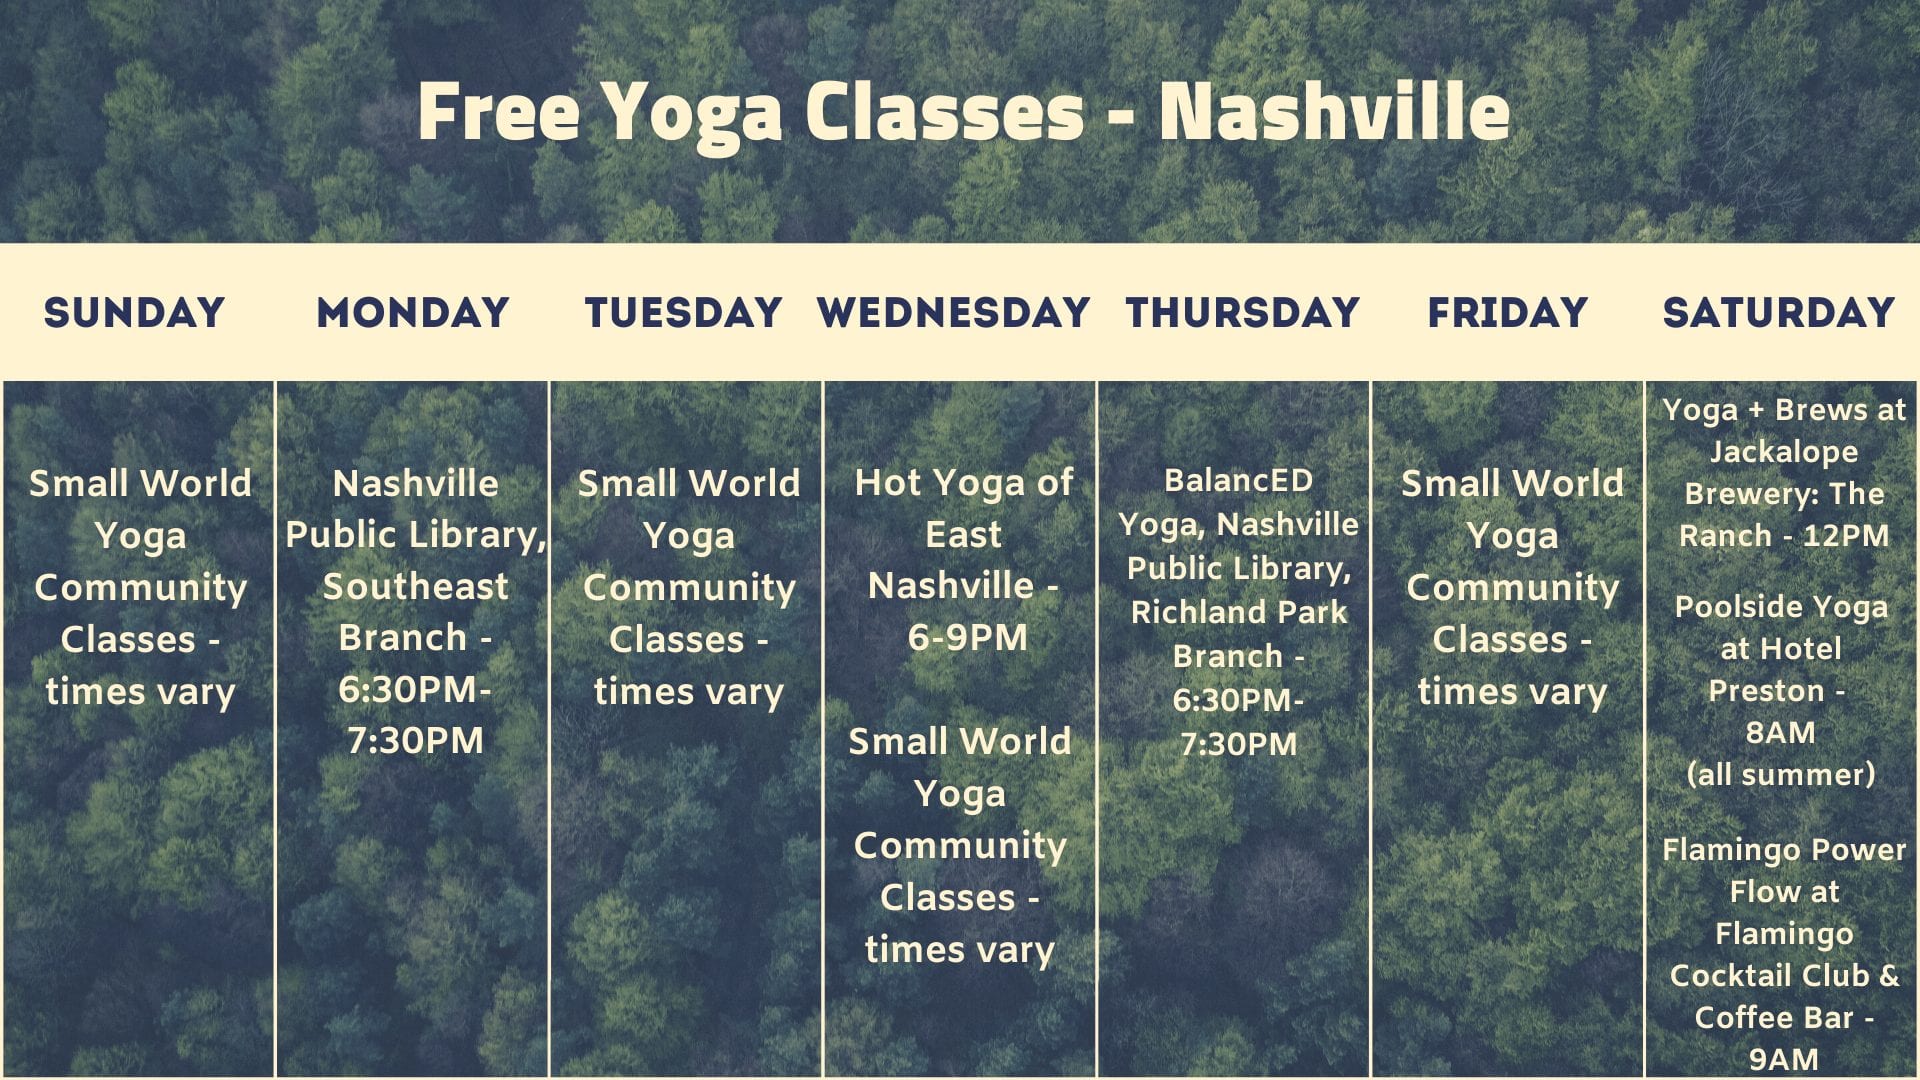 Free Yoga every day of the week in Nashville